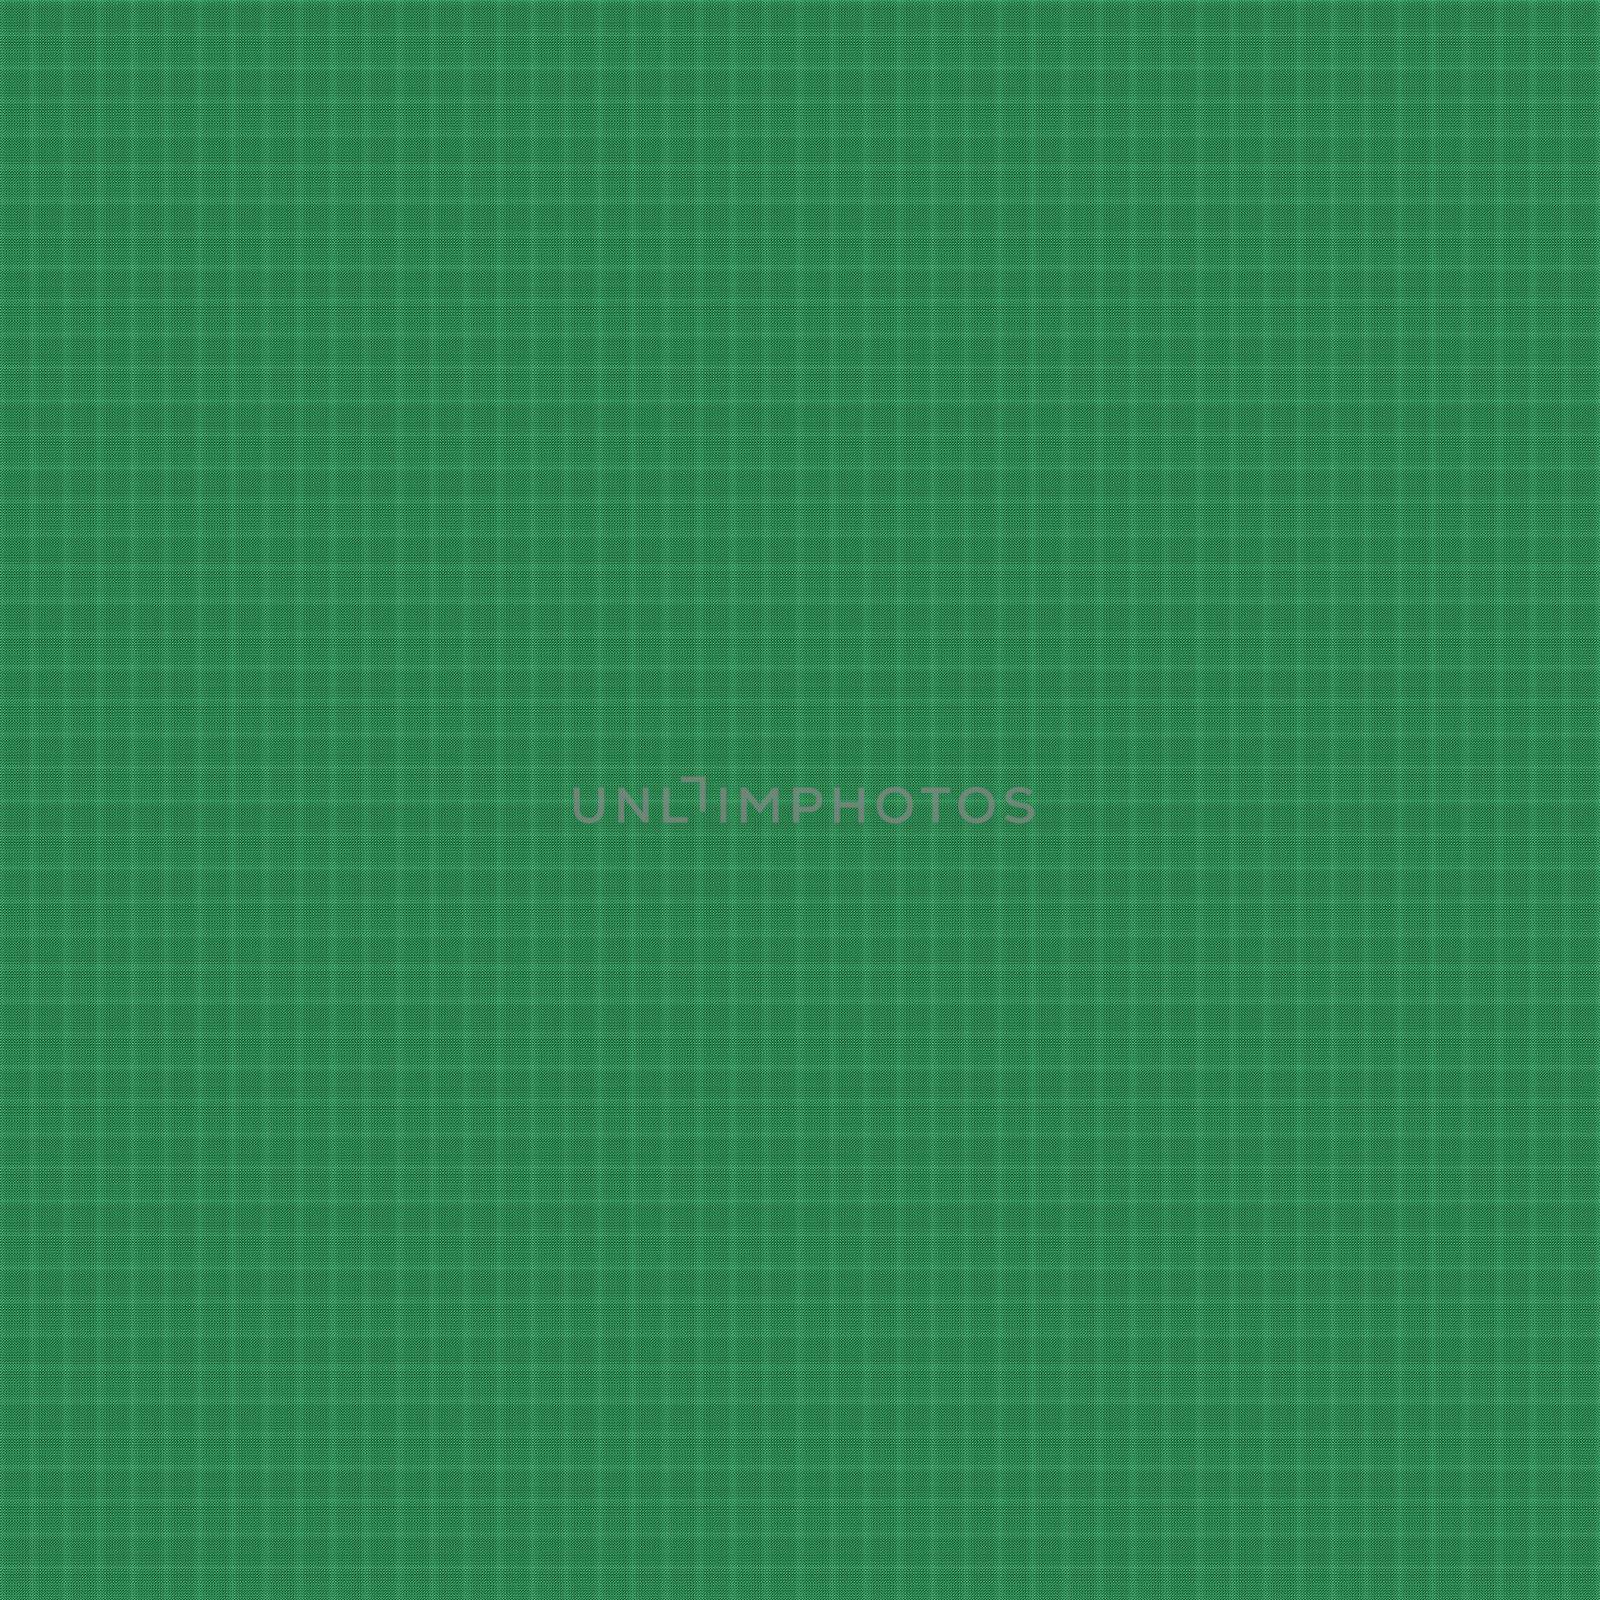 green background compiled by a multitude of tiny cubes, tiles seamlessly as a pattern